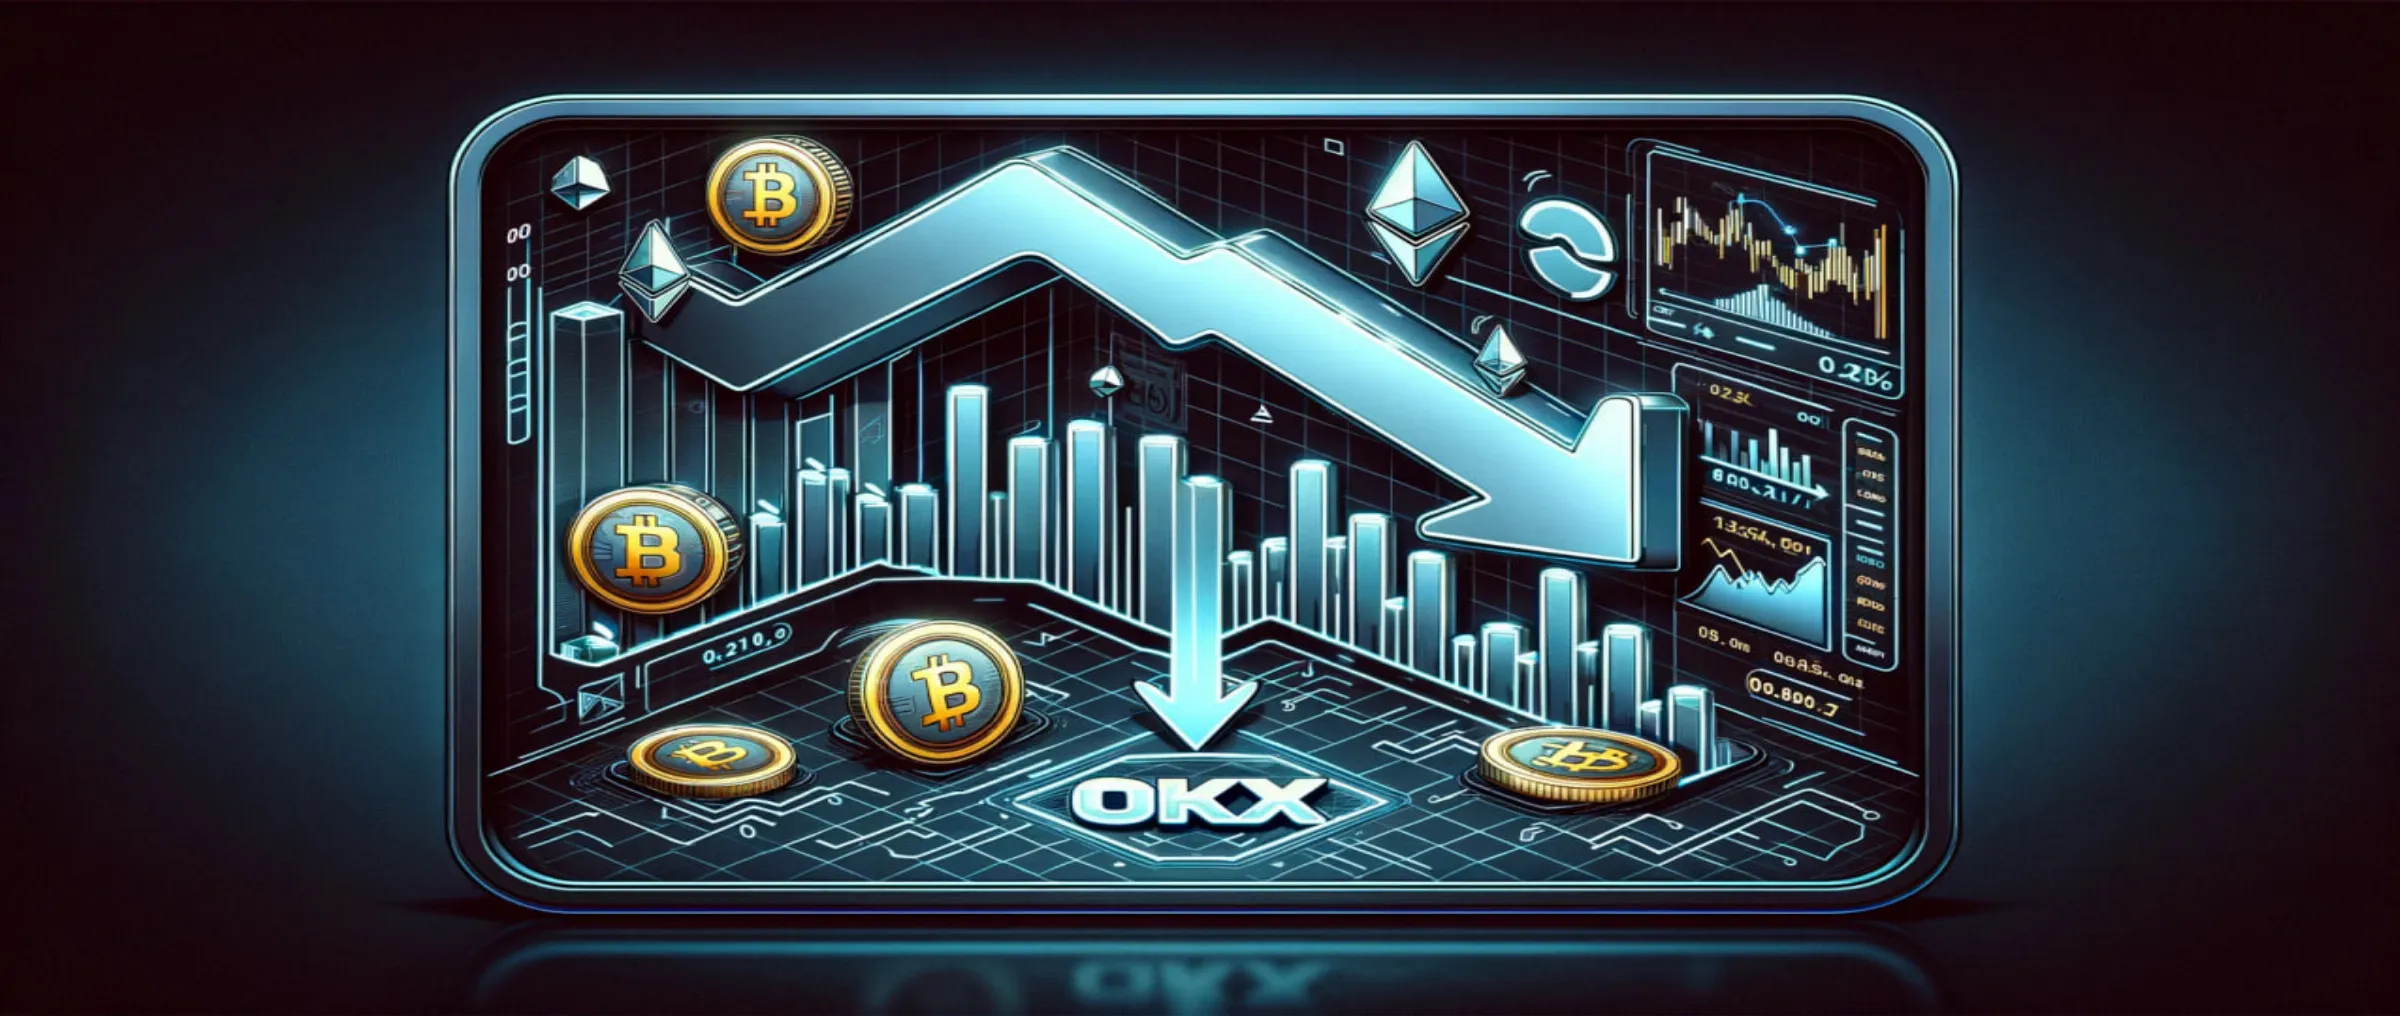 Capital outflow from OKX reached $630 million in one week